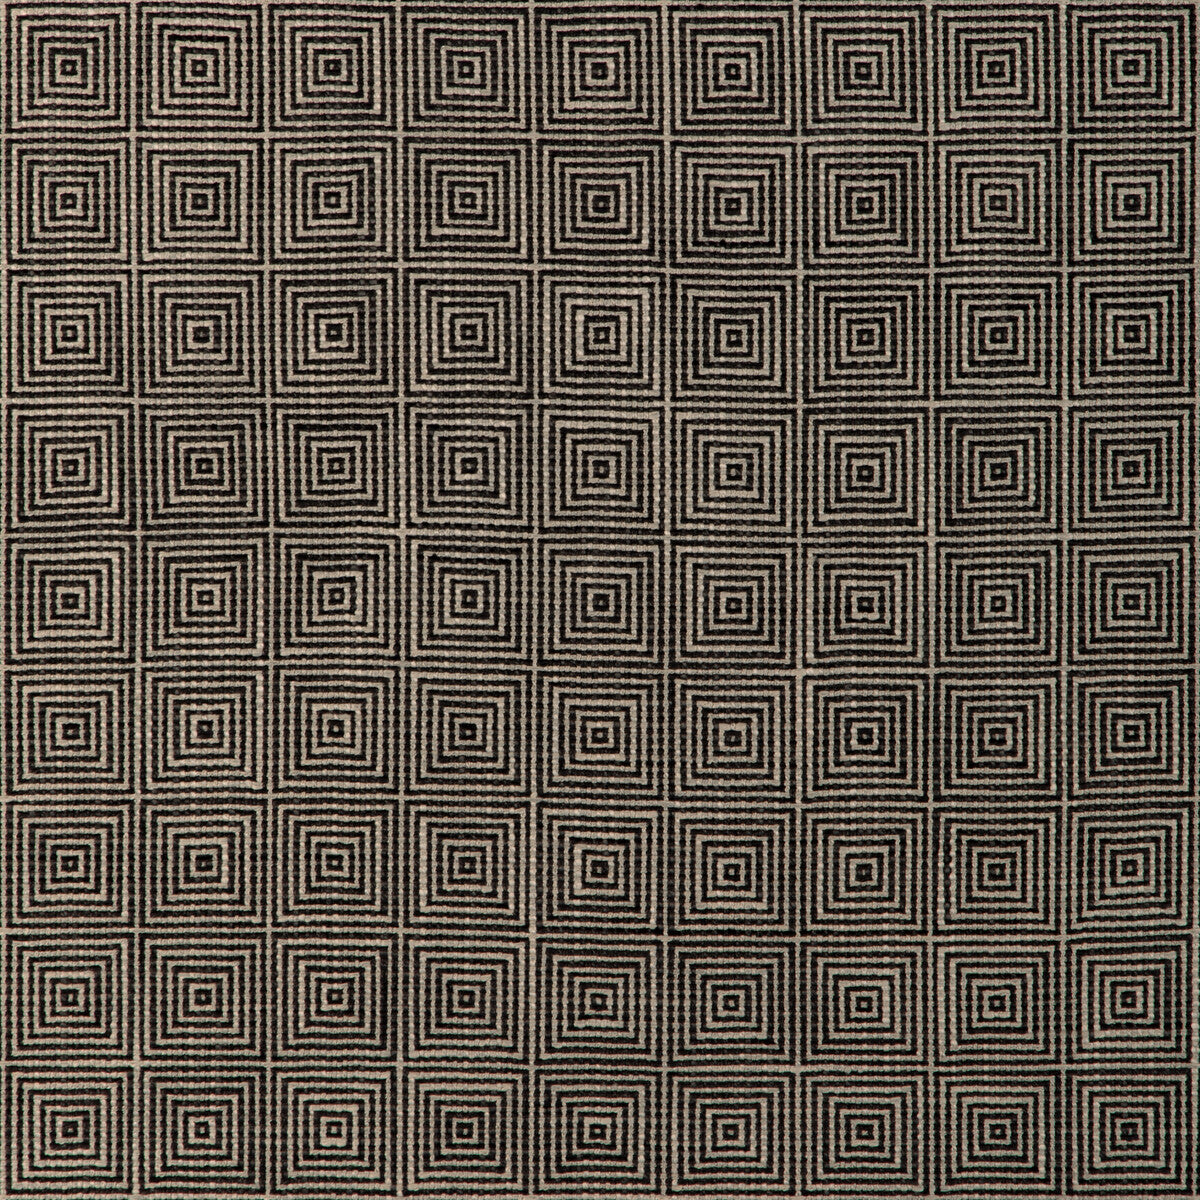 Kravet Design fabric in 37143-8 color - pattern 37143.8.0 - by Kravet Design in the Woven Colors collection